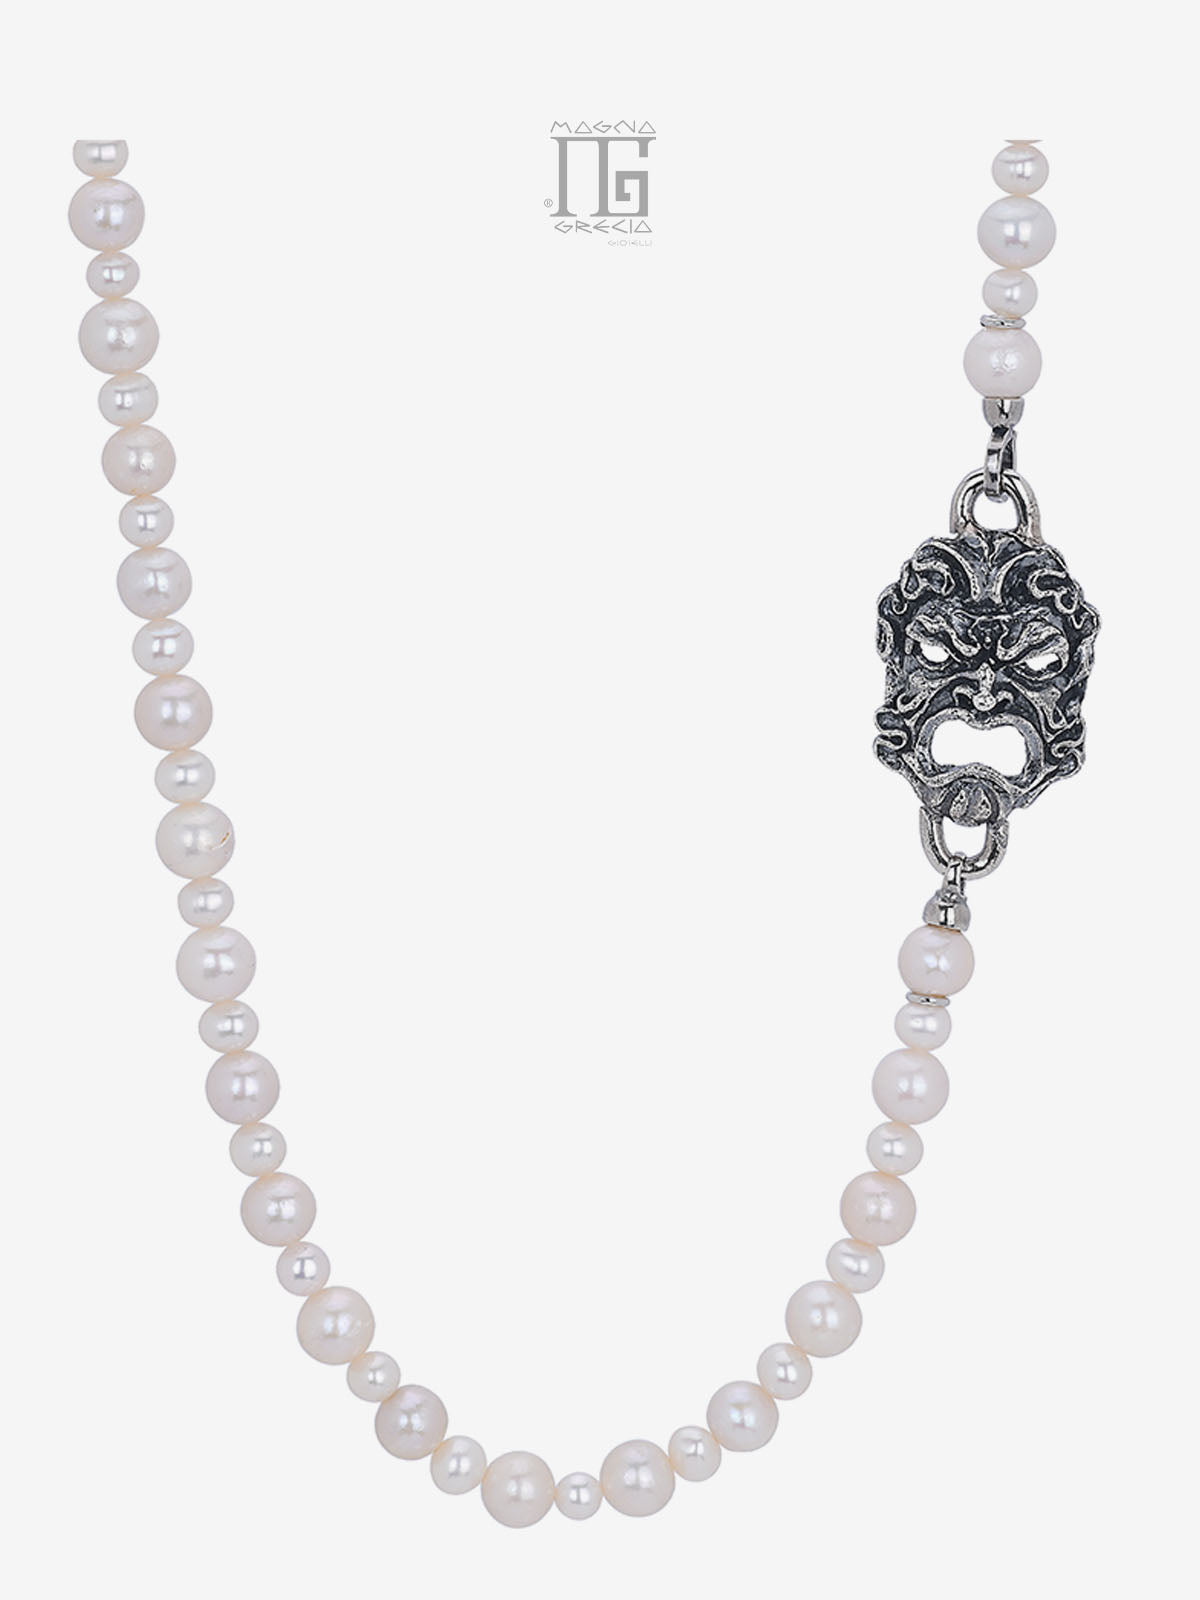 River Pearl Necklace with Apotropaic Mask in Silver Cod. MGK 4271 V